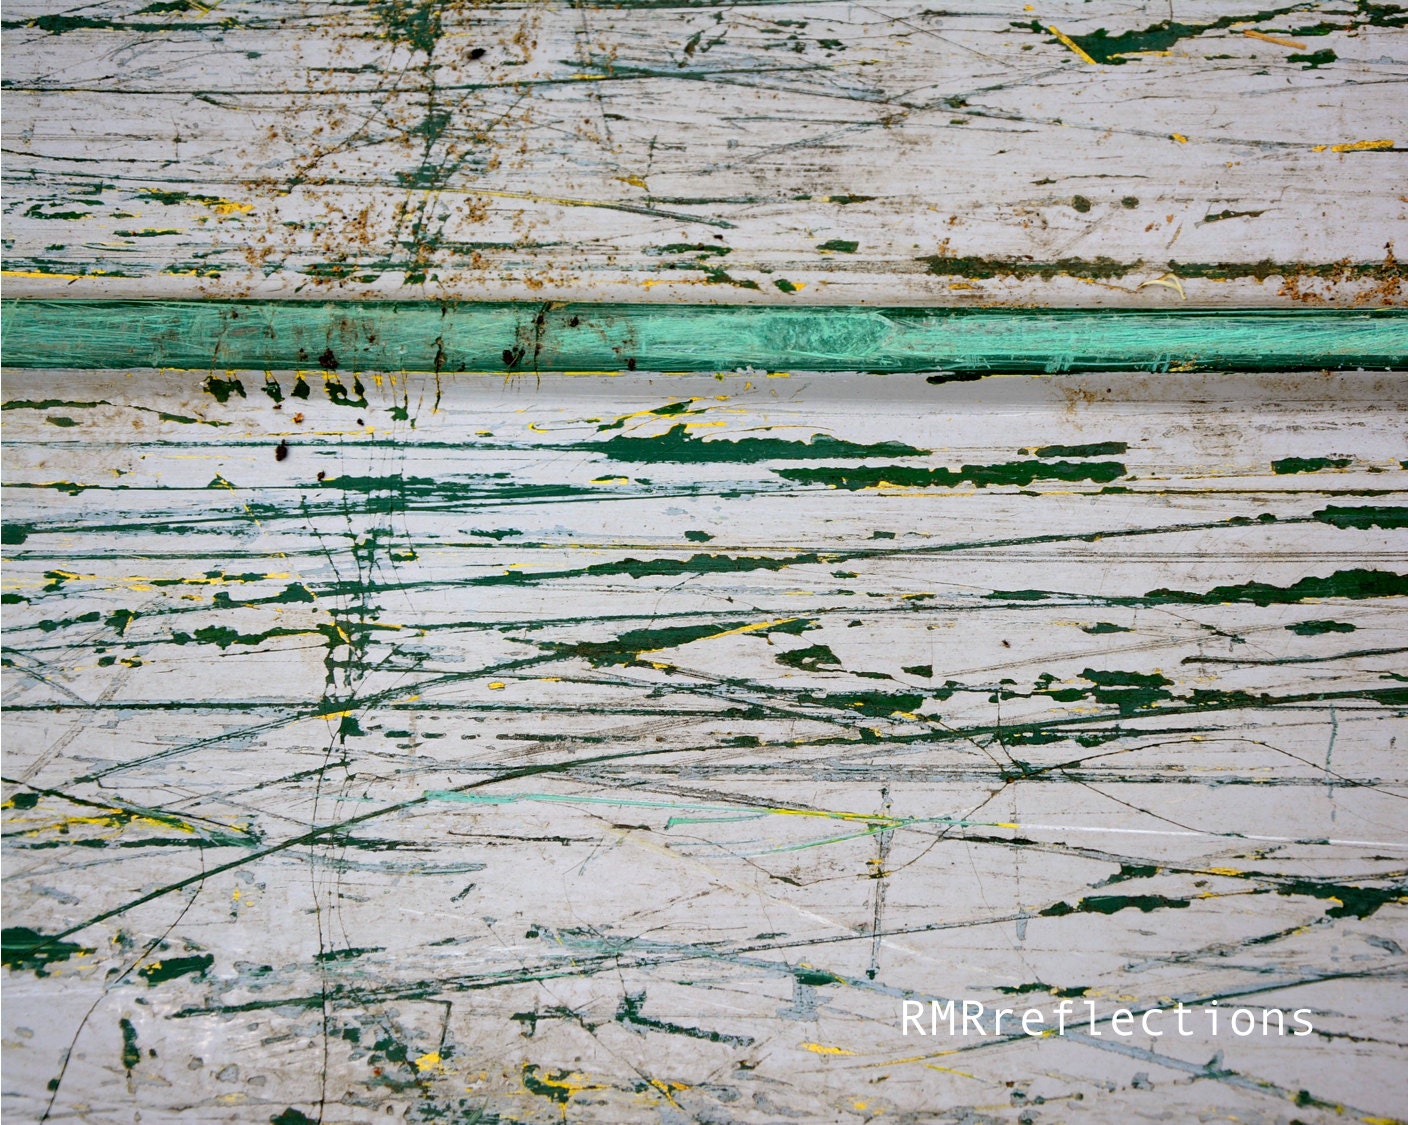 Teal Canoe, 8X10 Print, Photography, Rustic, Simple, Teal, Blue, Green, Yellow, Vintage Boat - RMRreflections